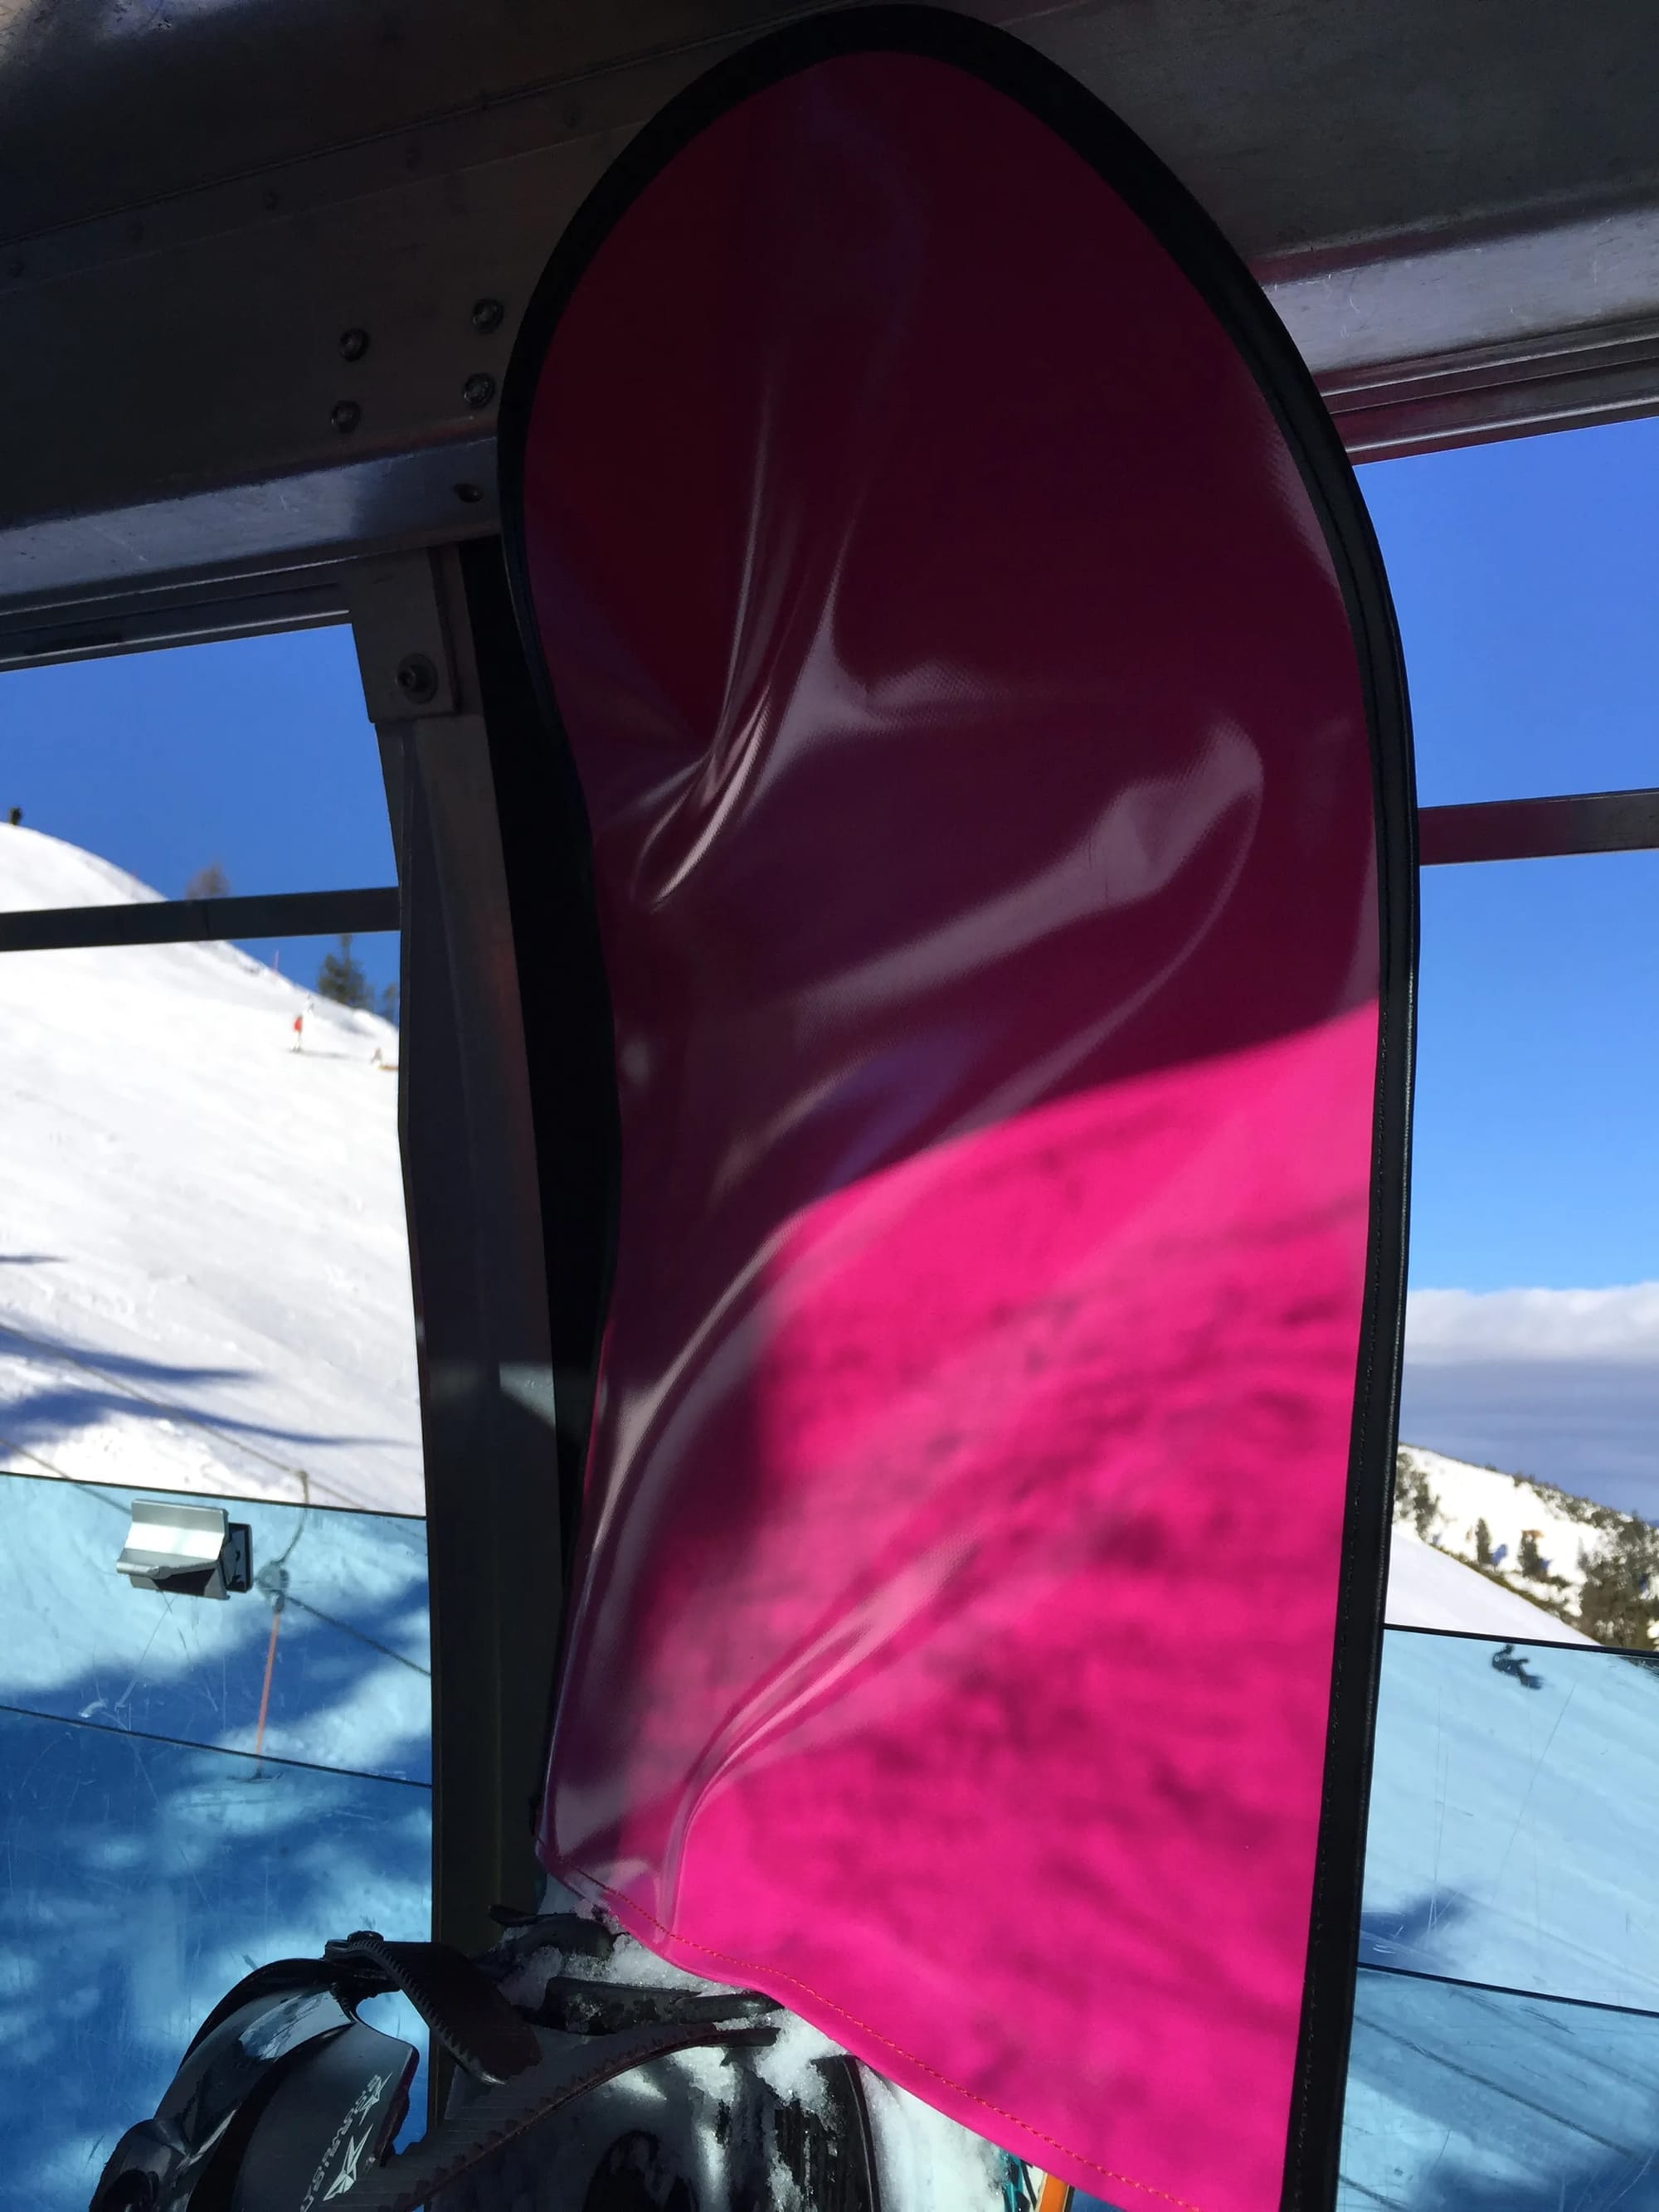 Photo by Author — snowboard “condoms”